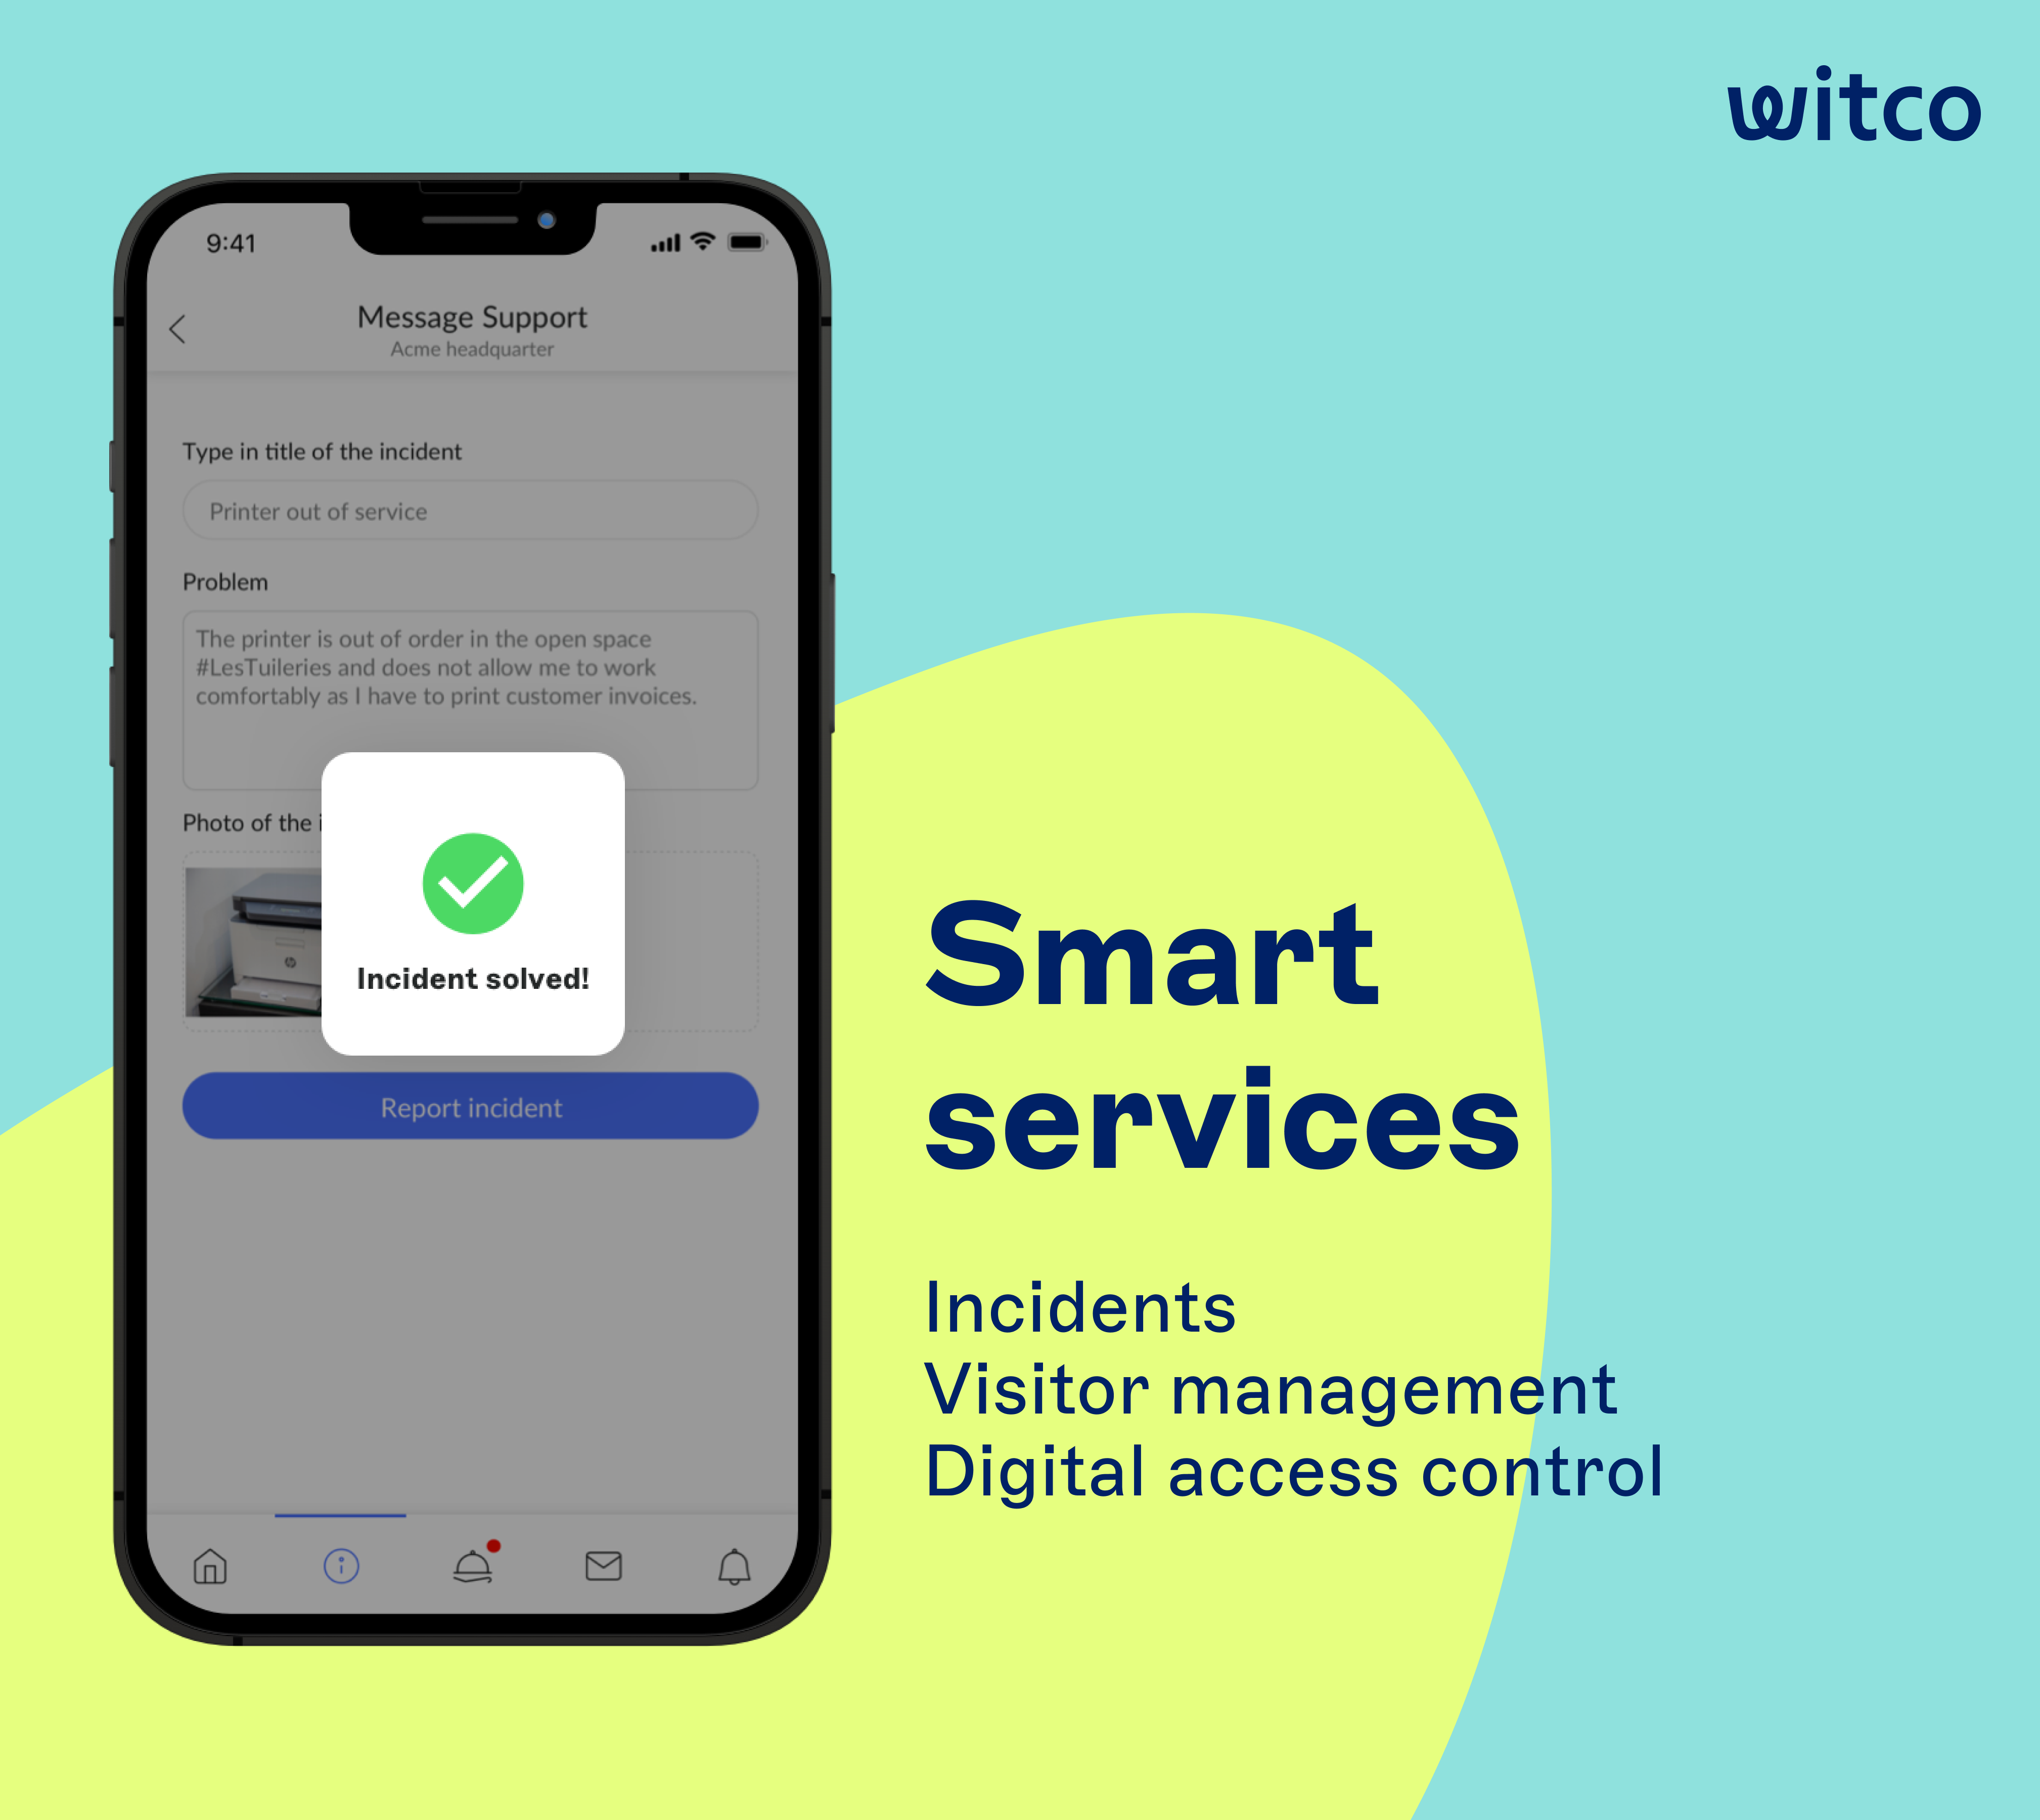 Managing incidents, visitors, and access controls becomes efficient and transparent to all stakeholders: workplace managers, employees, external vendors, etc.